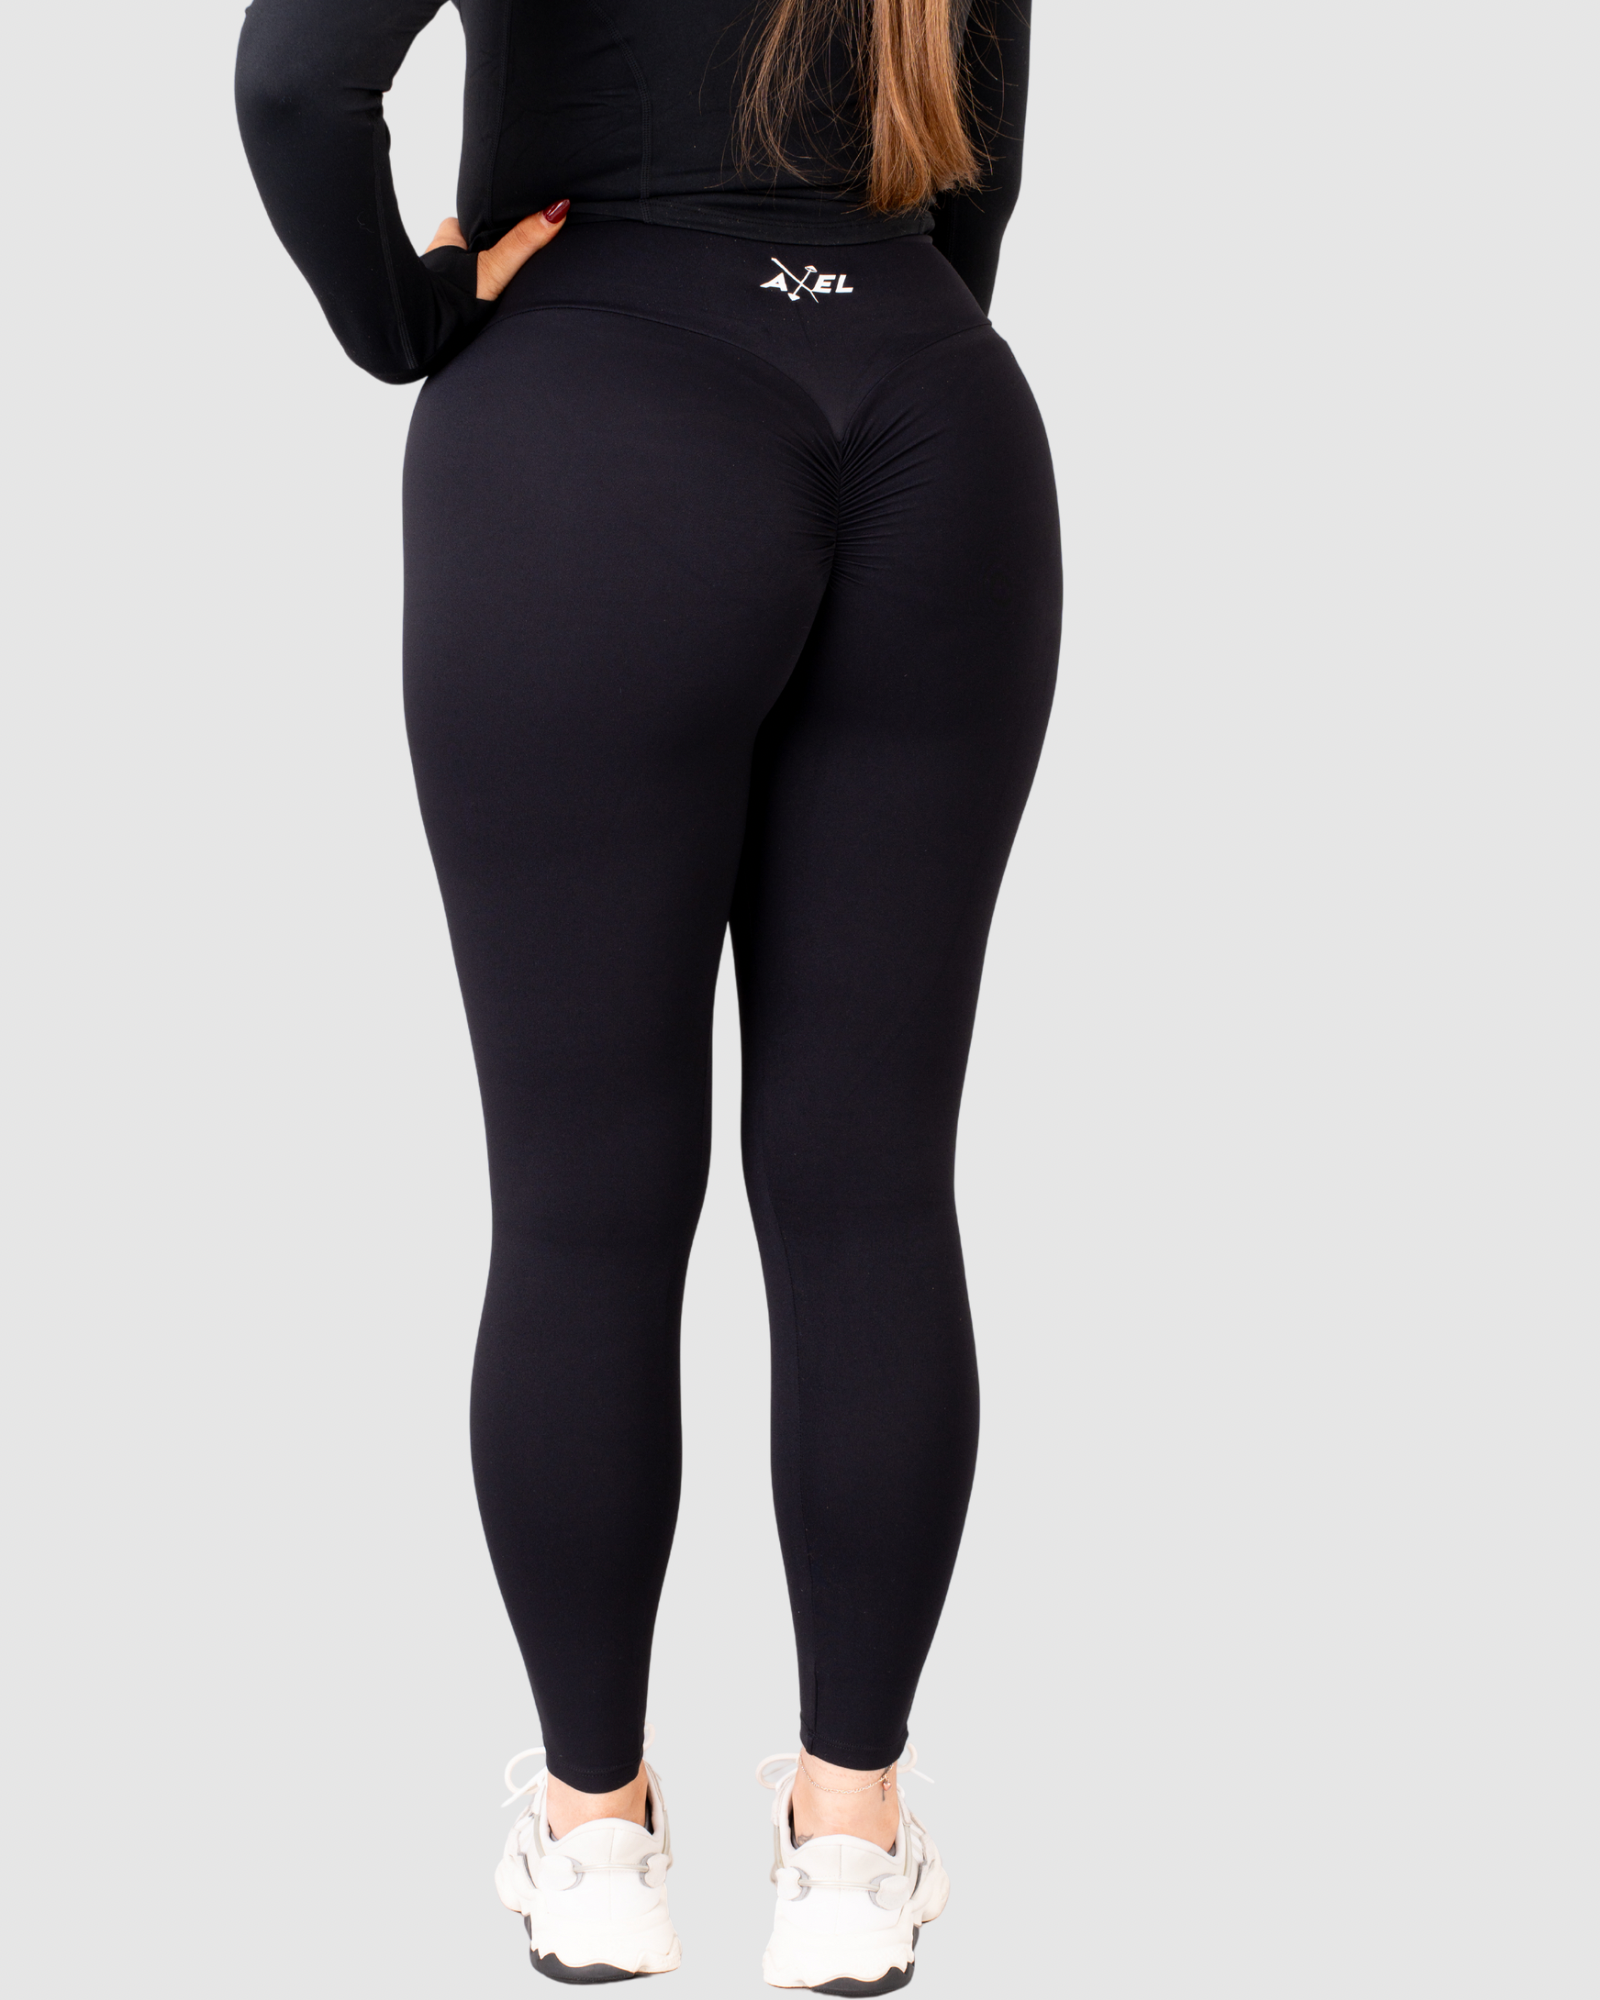 SSYS Black Flare Leggings With Open Side Slit – Shop Style Your Senses